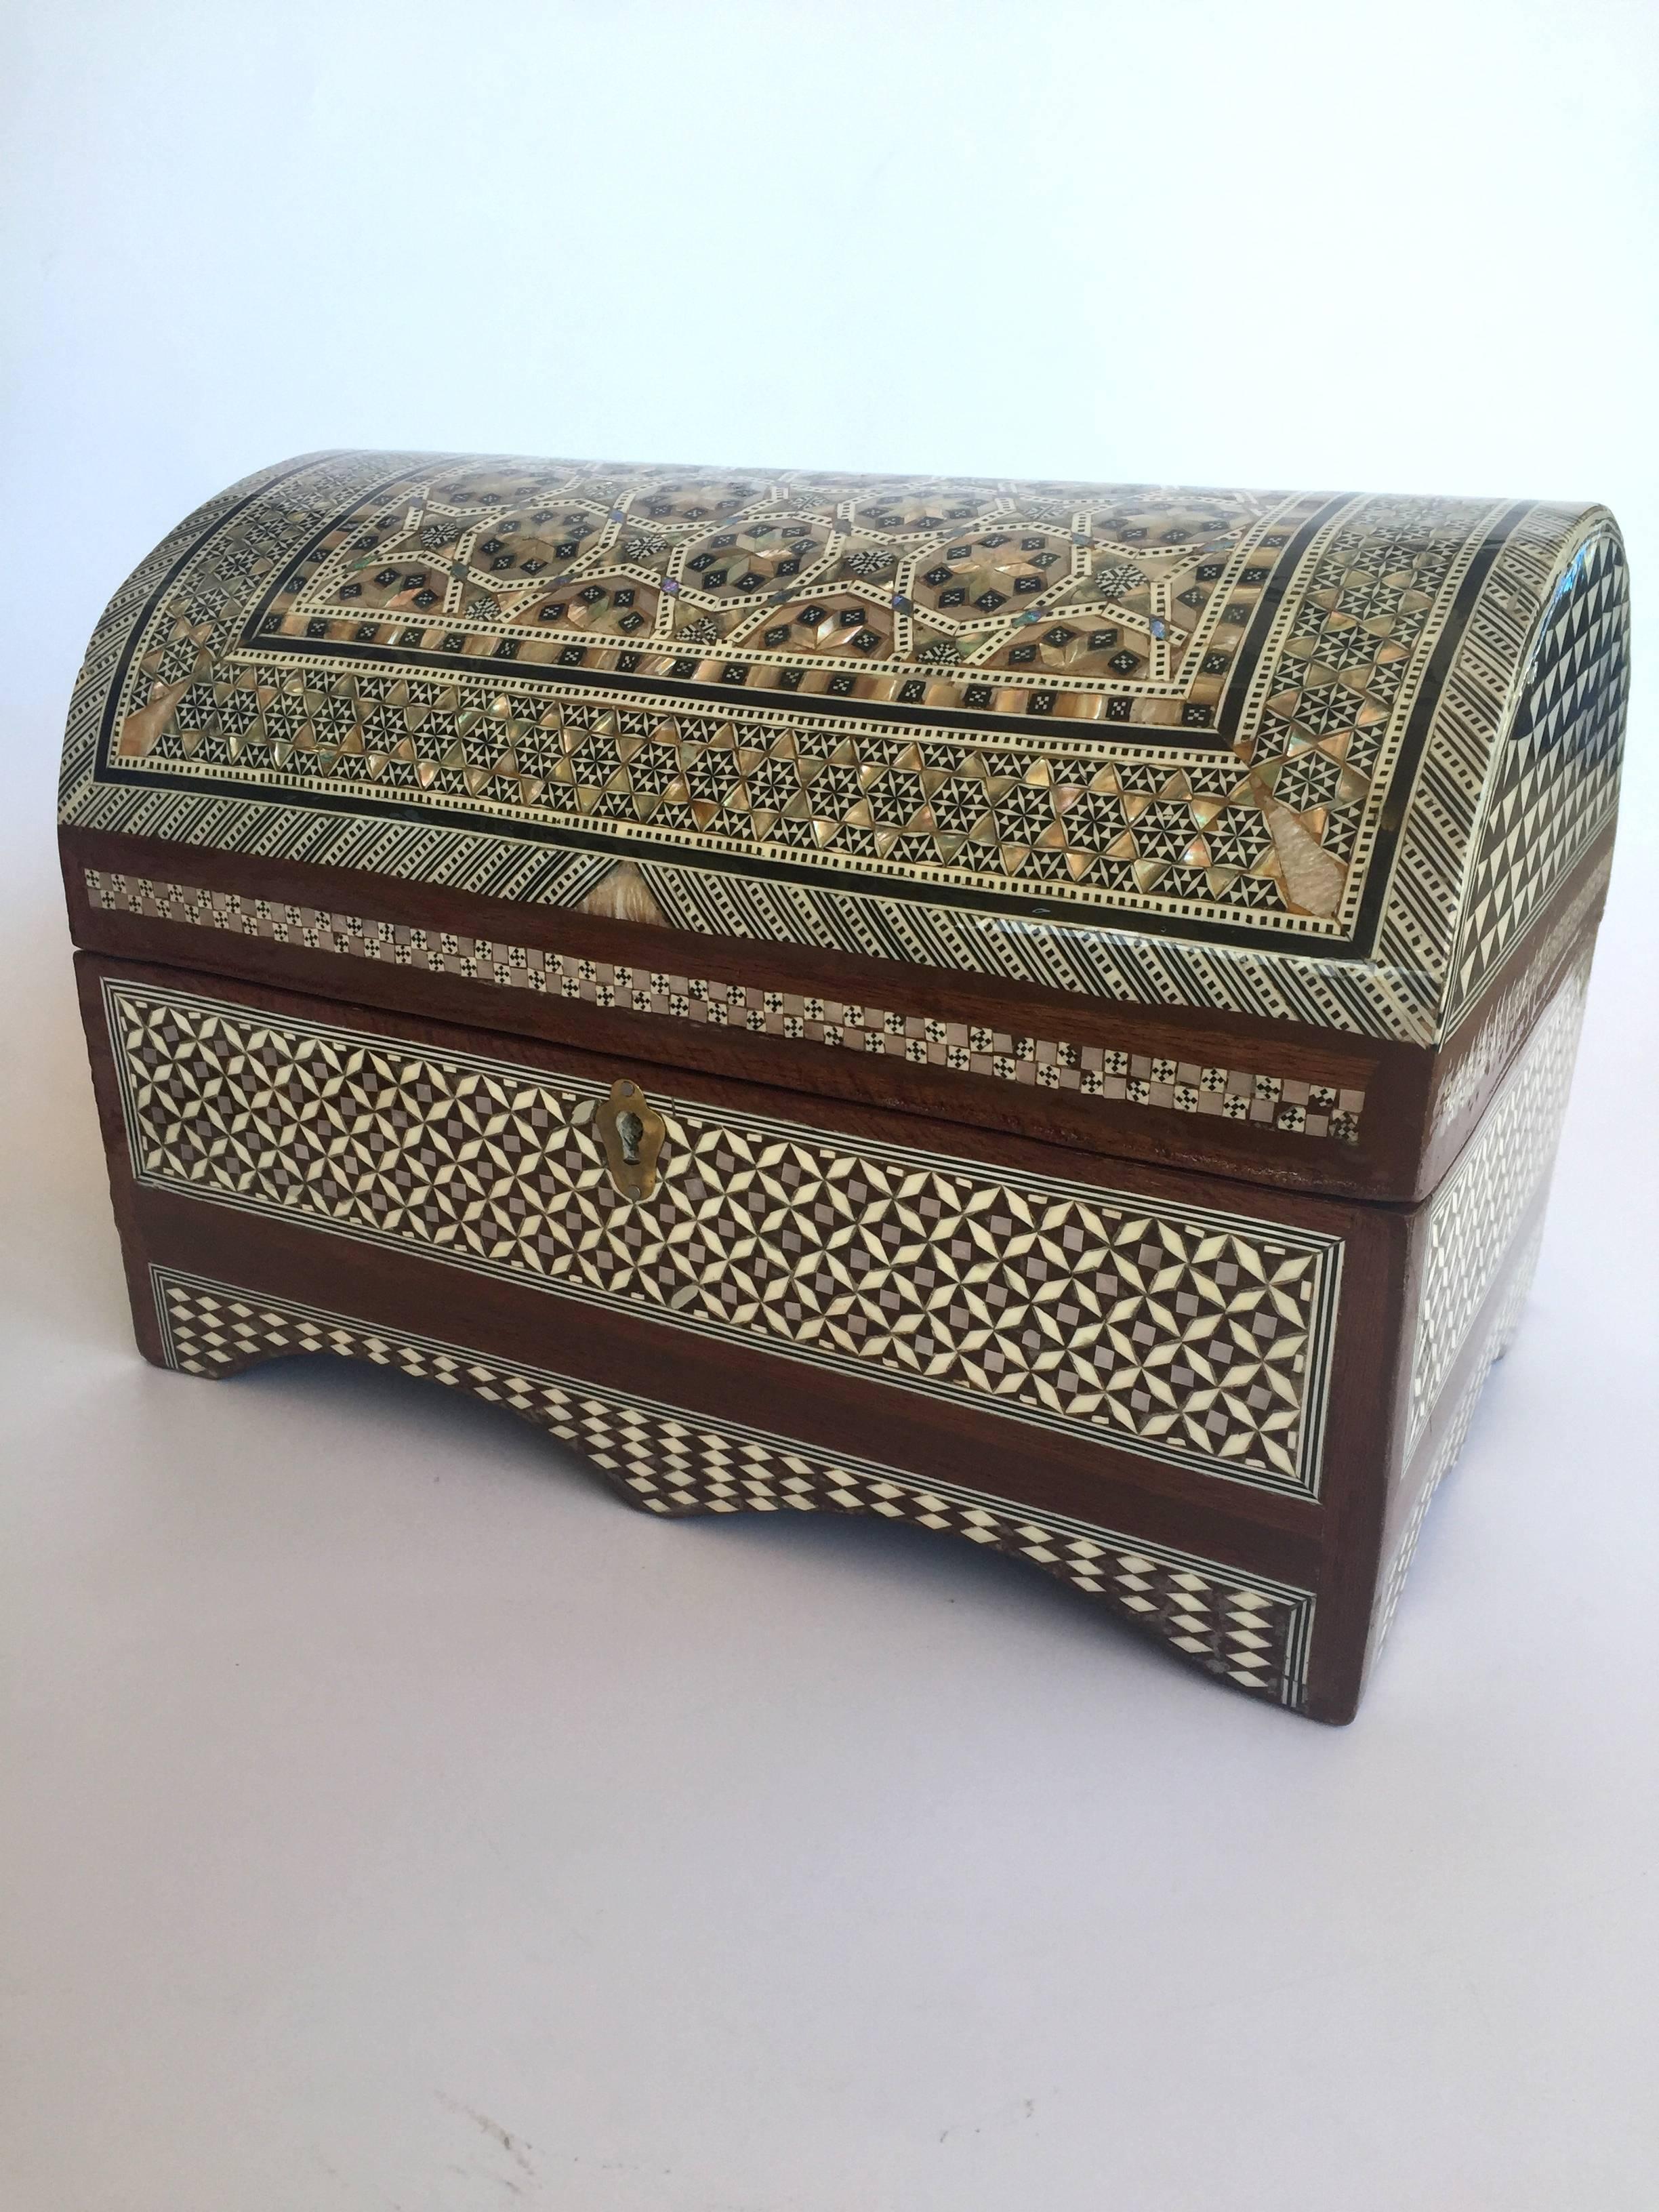 The craftsmanship on this beautiful piece is amazing. The wood box is entirely encrusted in genuine mother-of-pearl. The intricate pattern and fine precision makes it a true work of art. 

Two-tiered, lined with felt with lock and key.

Some